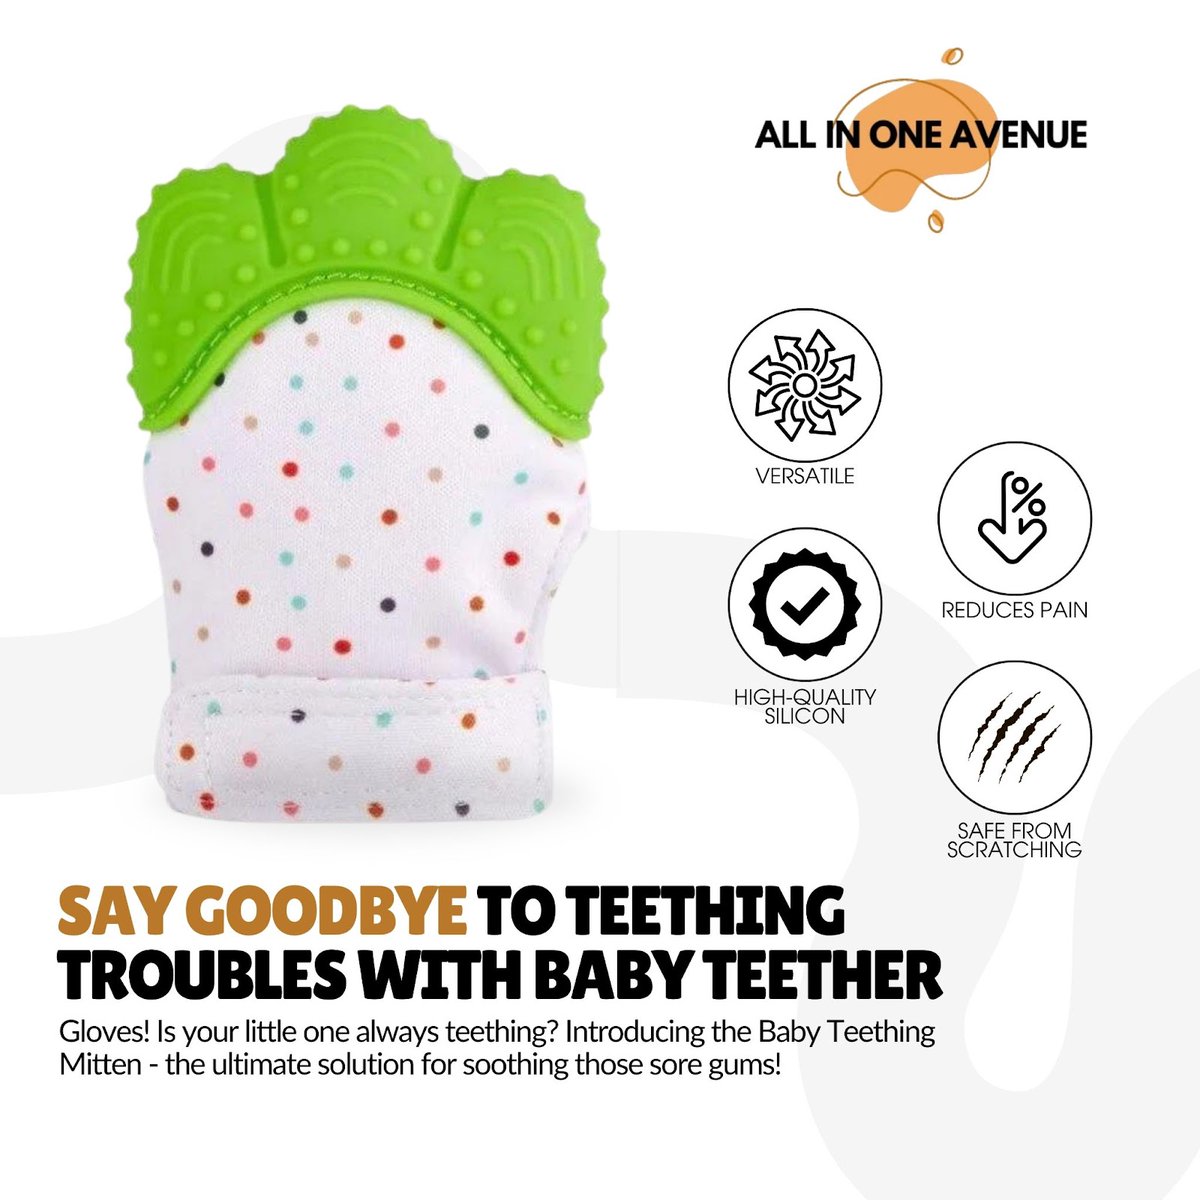 Is your little one always teething? Introducing the Baby Teething Mitten - the ultimate solution for soothing those sore gums!

Benefits:

Provides safe relief from teething discomfort

Protects baby from scratching themselves

Reduces irritation from saliva
.
#teethingrelief